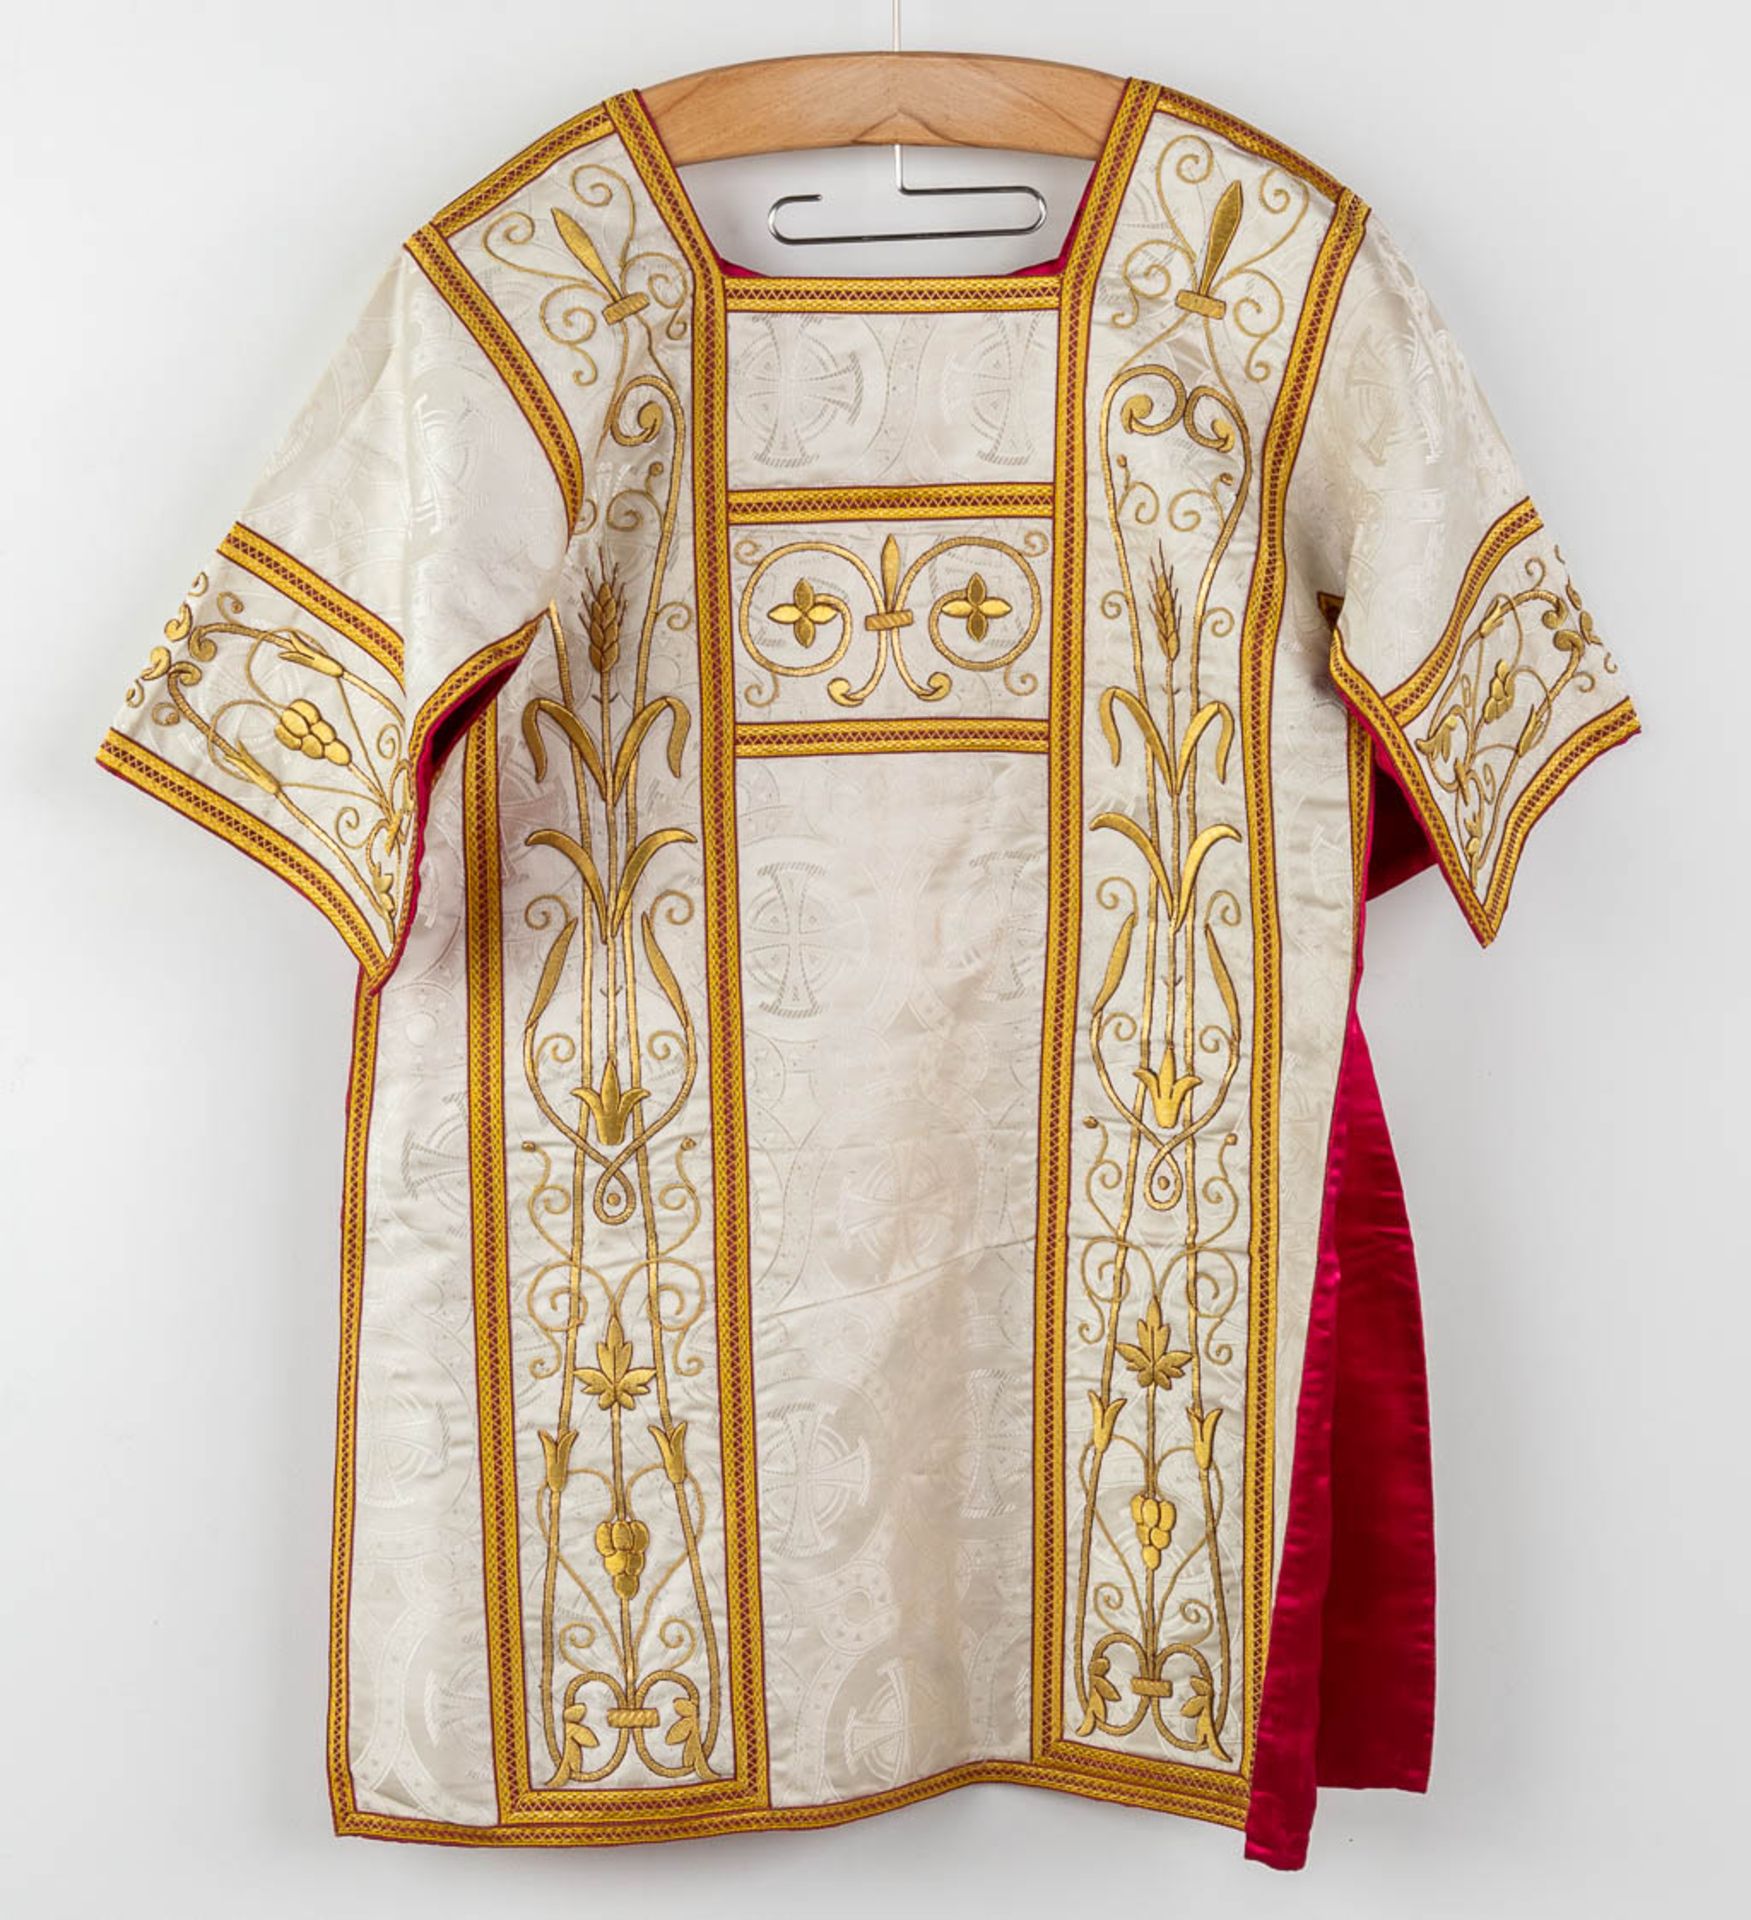 A matching set of Liturgical robes, 4 dalmatics, maniples and stola. - Image 12 of 17